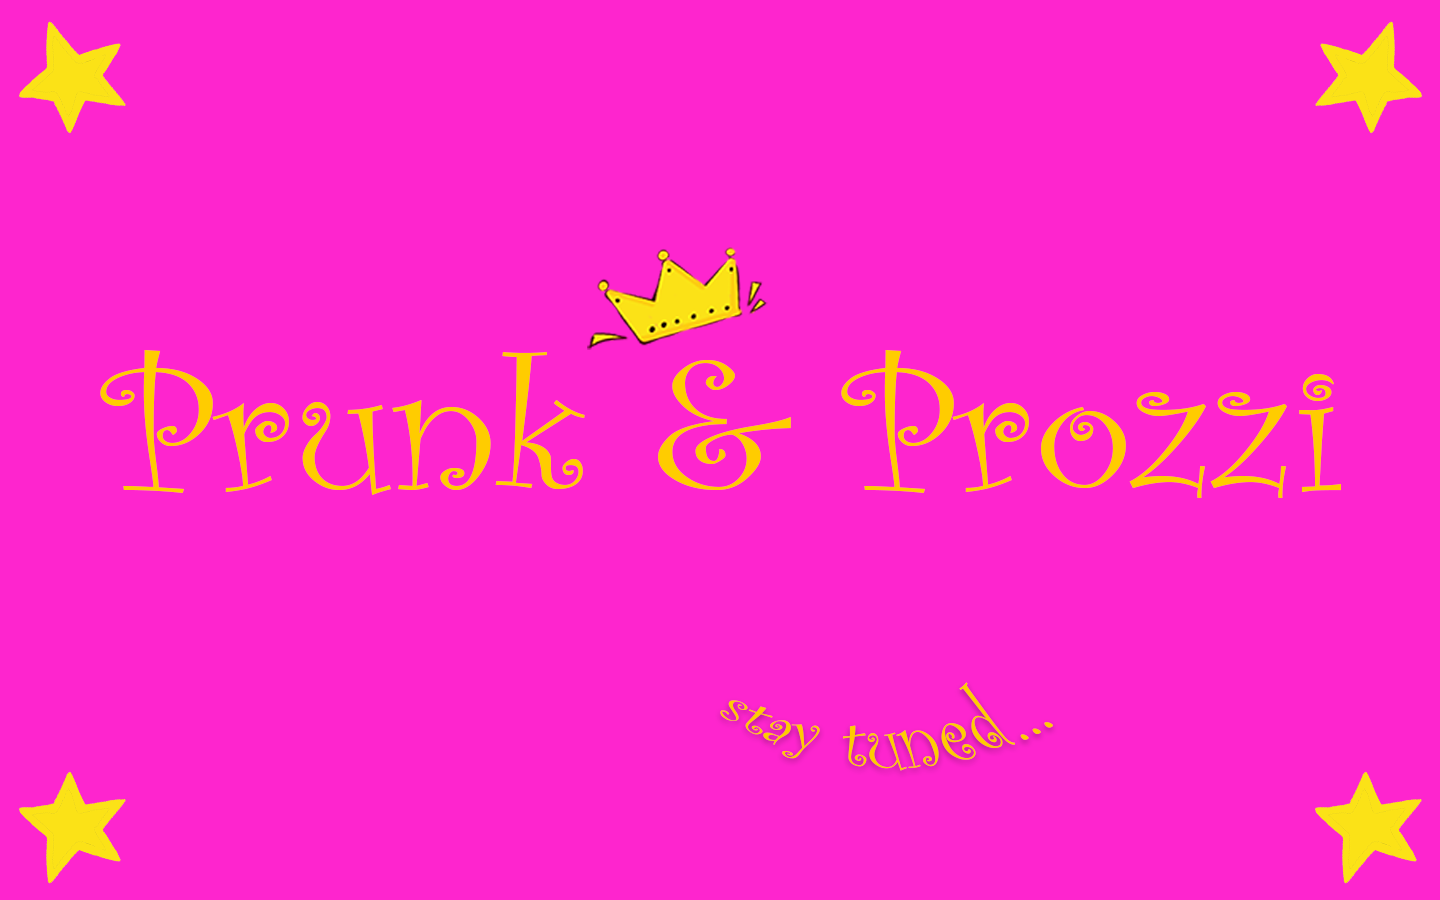 Prunk und Prozzi Neustart 2022 - stay tuned for things to come ;-)